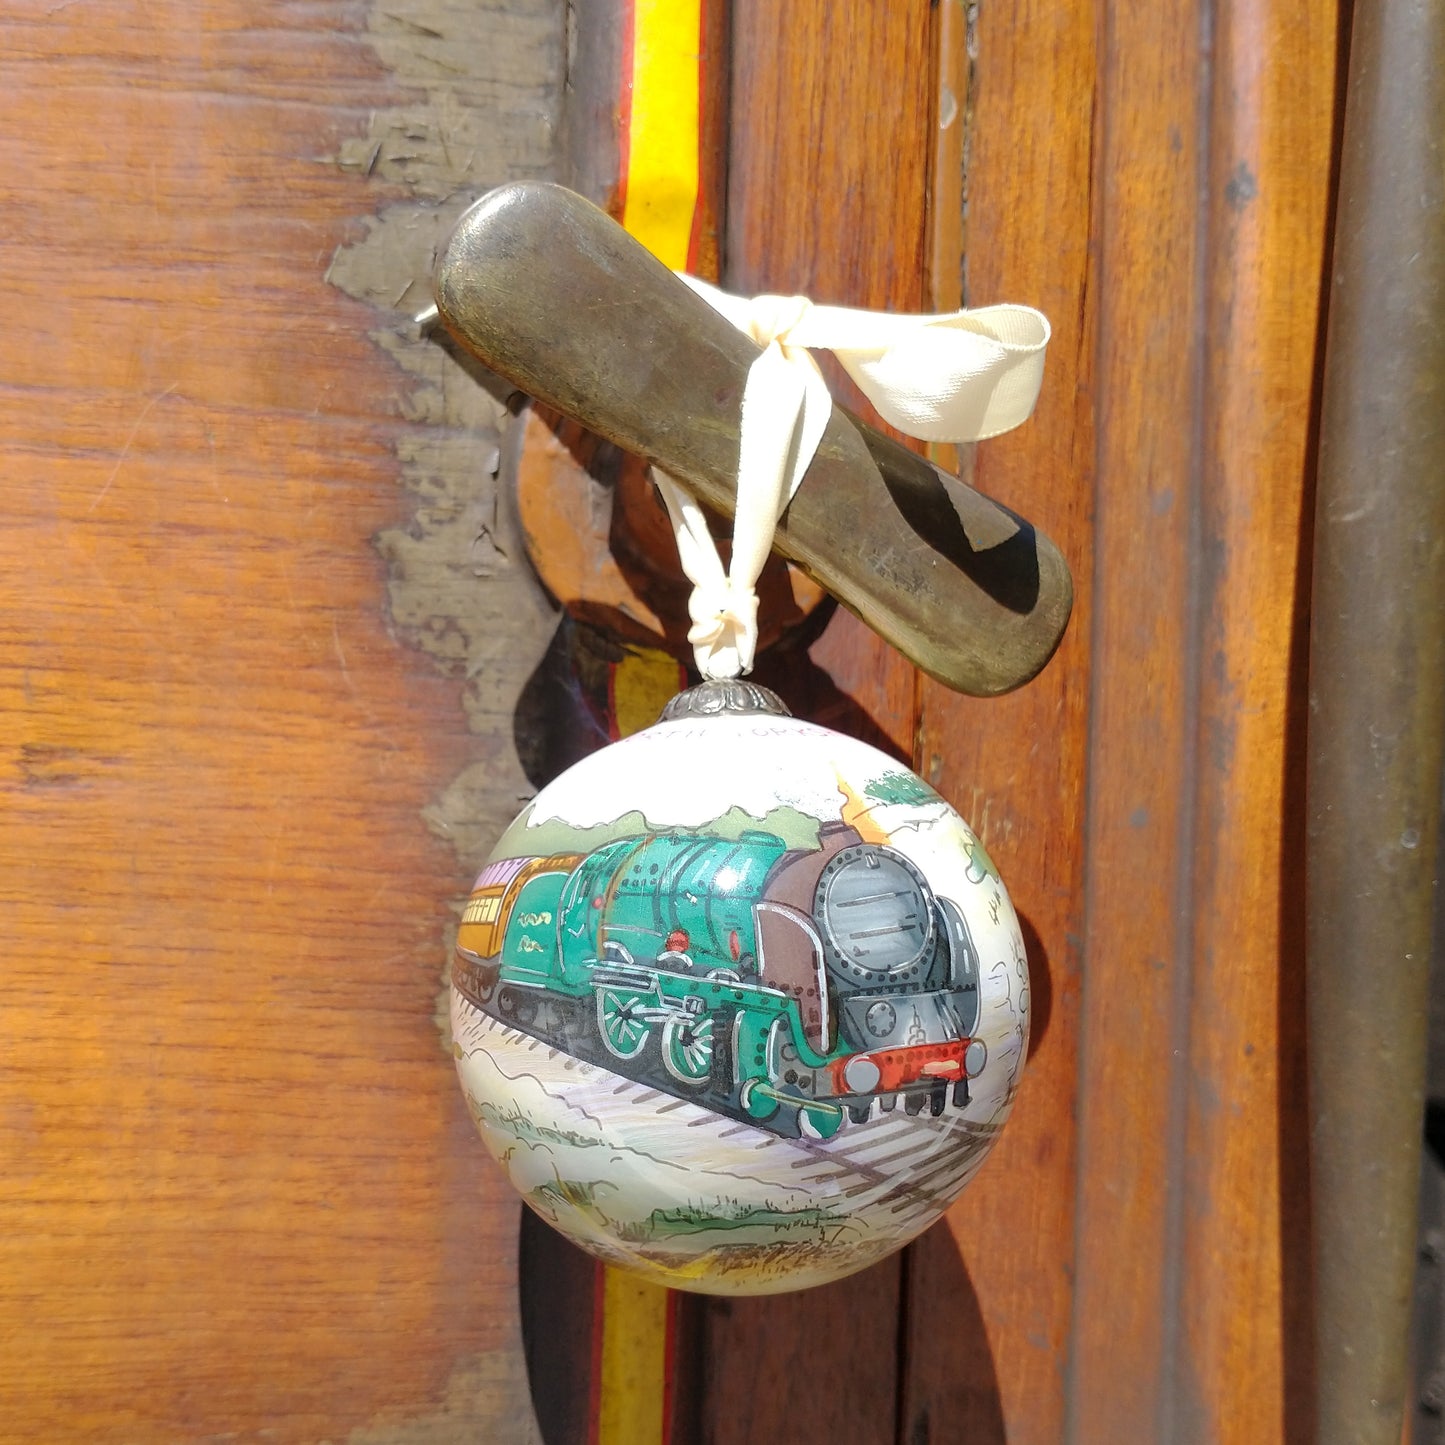 The bauble is tied to the handle of a teak carriage by a cream ribbon.